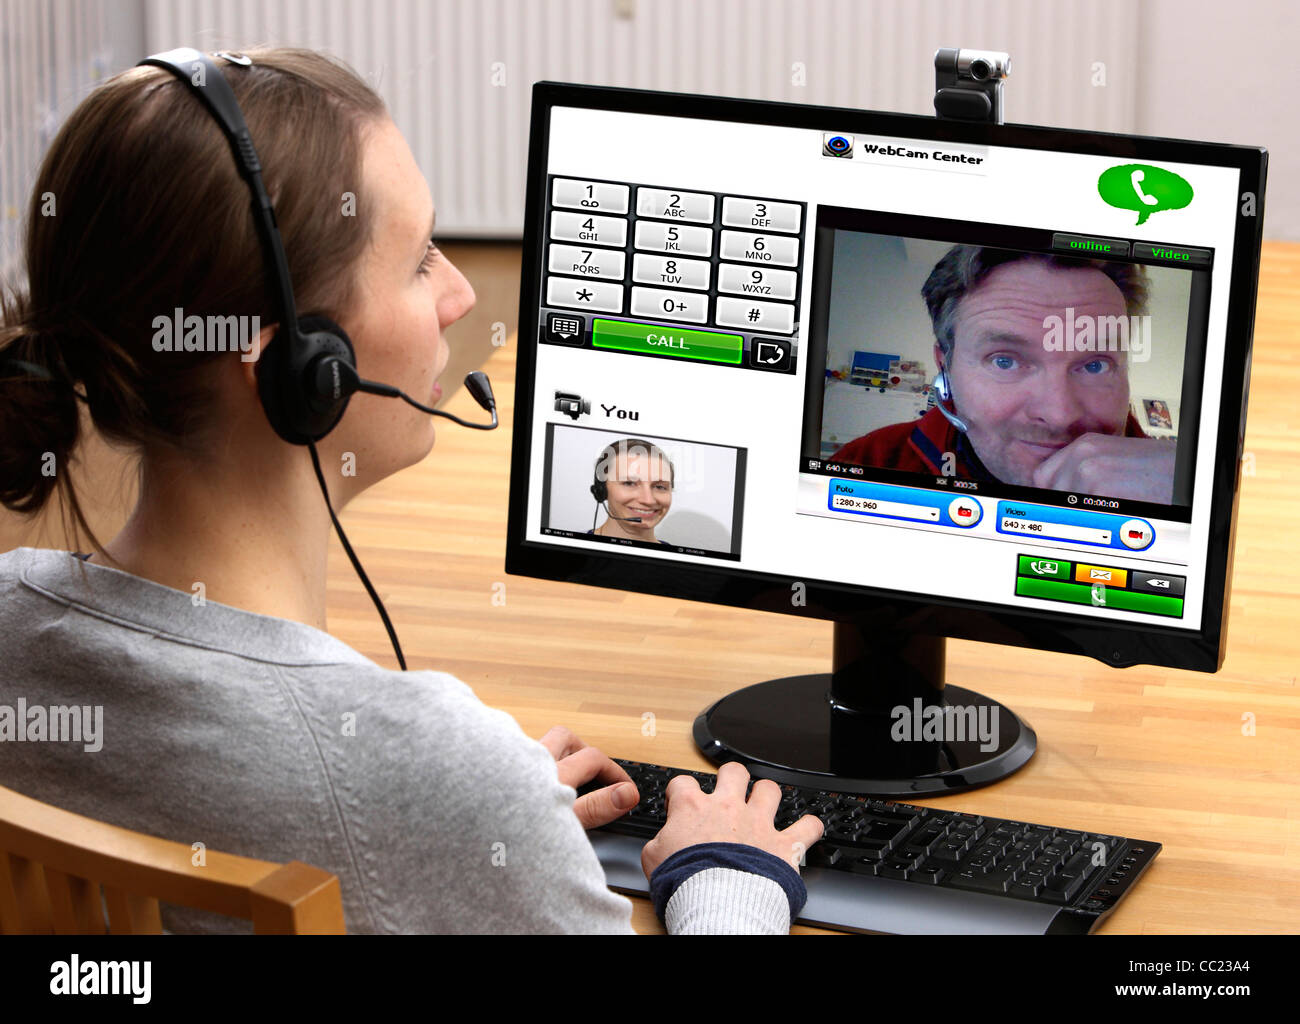 Internet chat cam Online chat